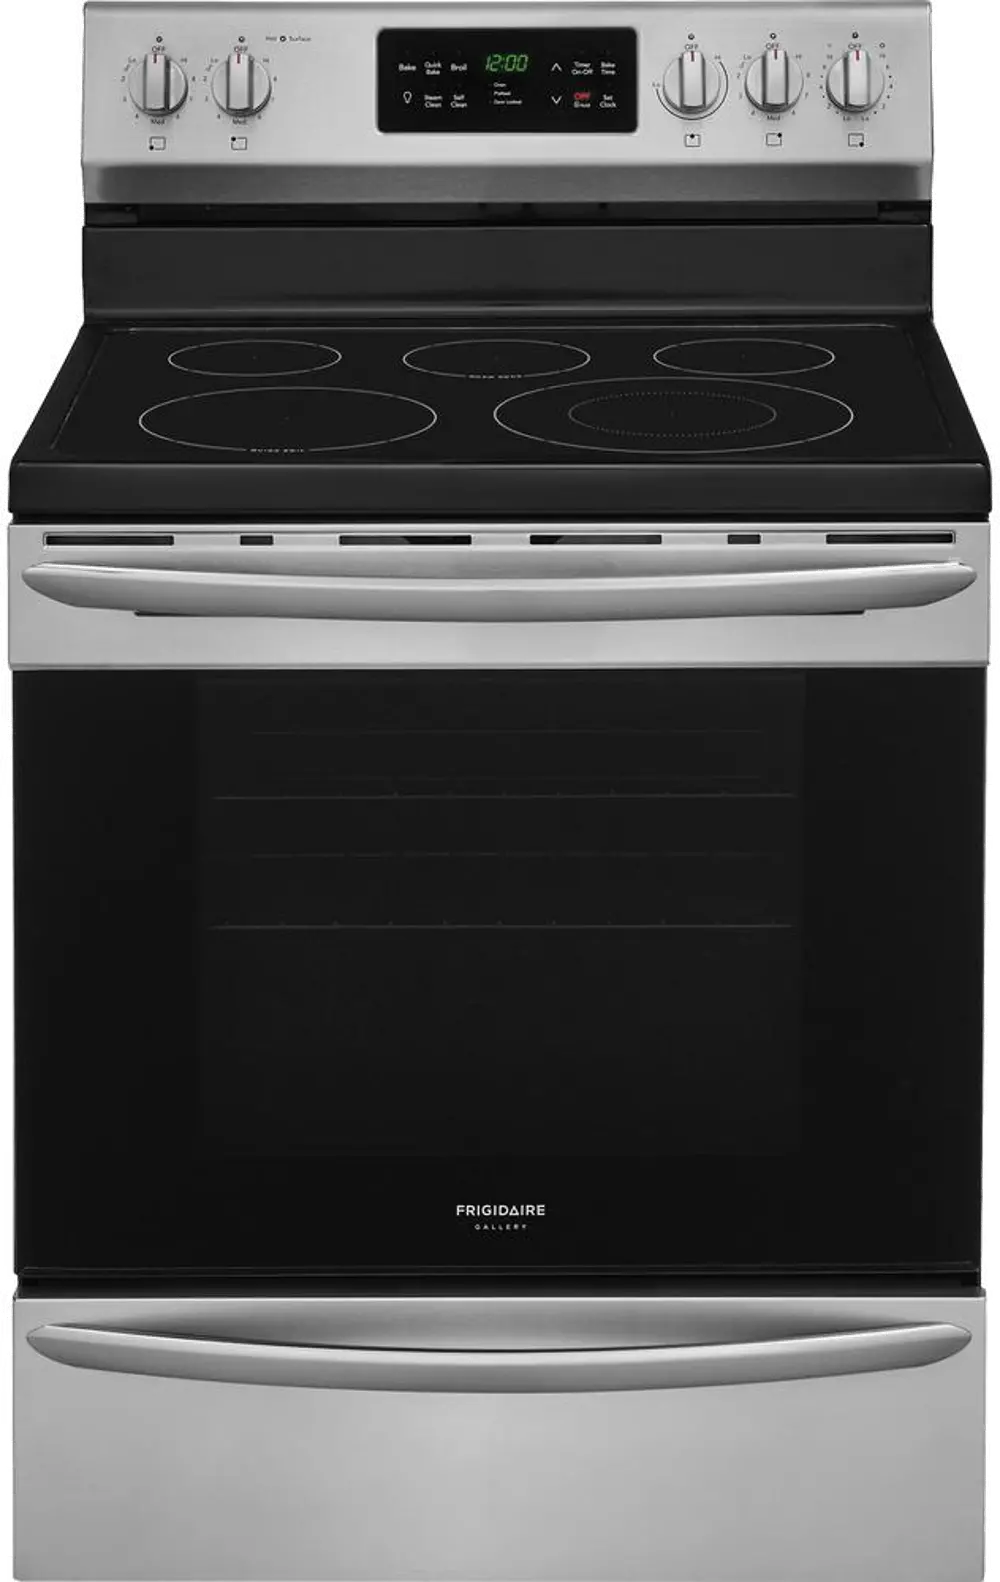 FGEF3036TF Frigidaire Gallery Electric Range - 5.4 cu. ft. Stainless Steel-1